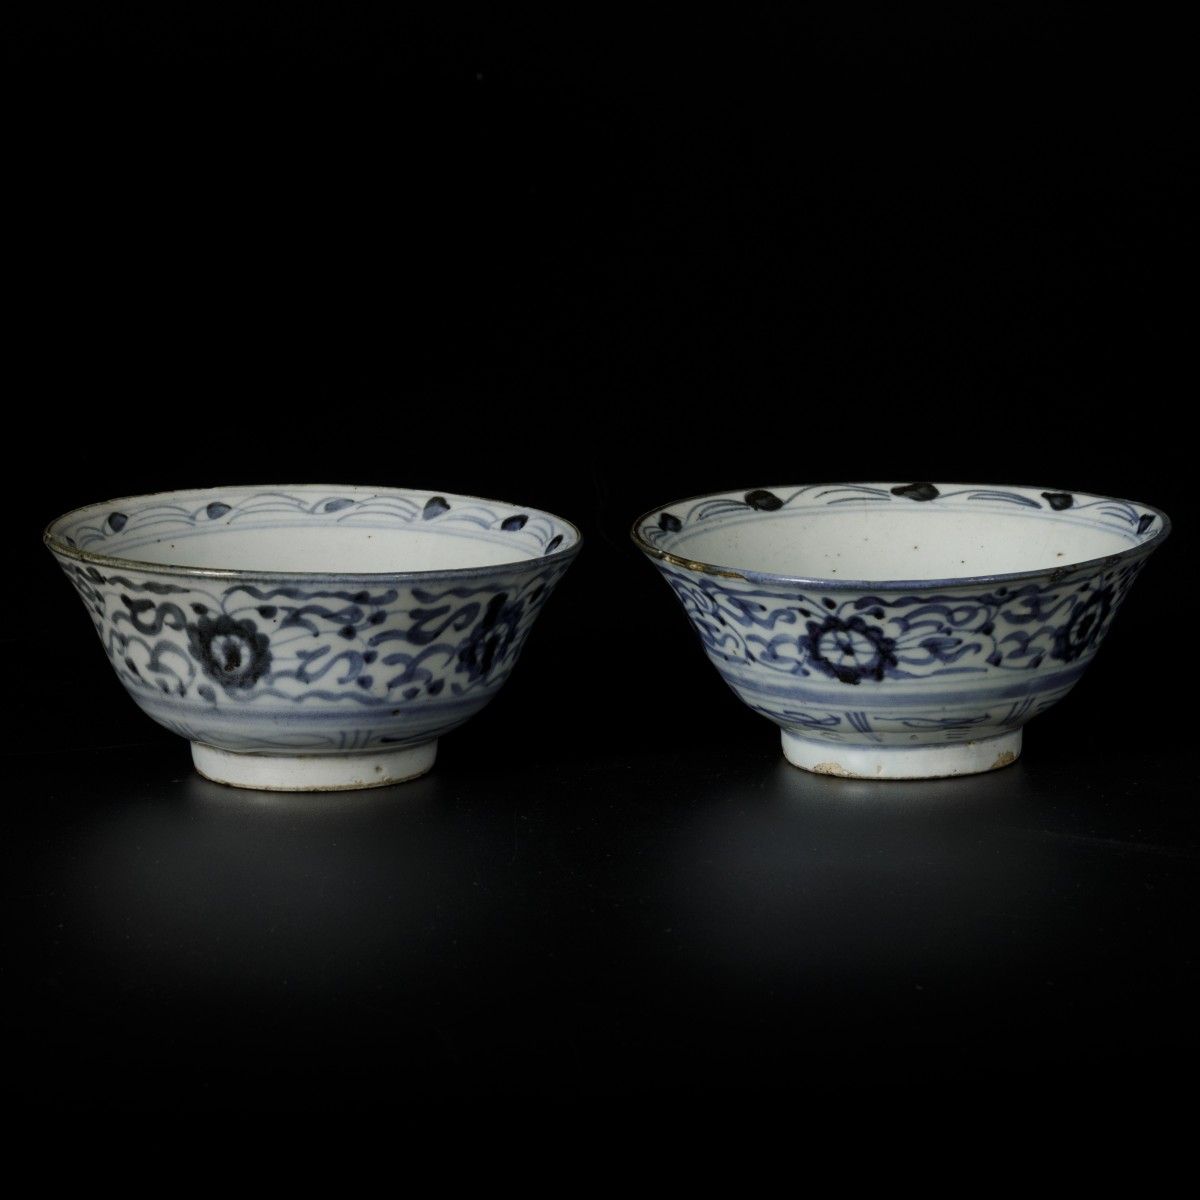 A lot of (2) Swatow bowls, China, 19th century. Diam. 16 cm. Chips and hairlines&hellip;